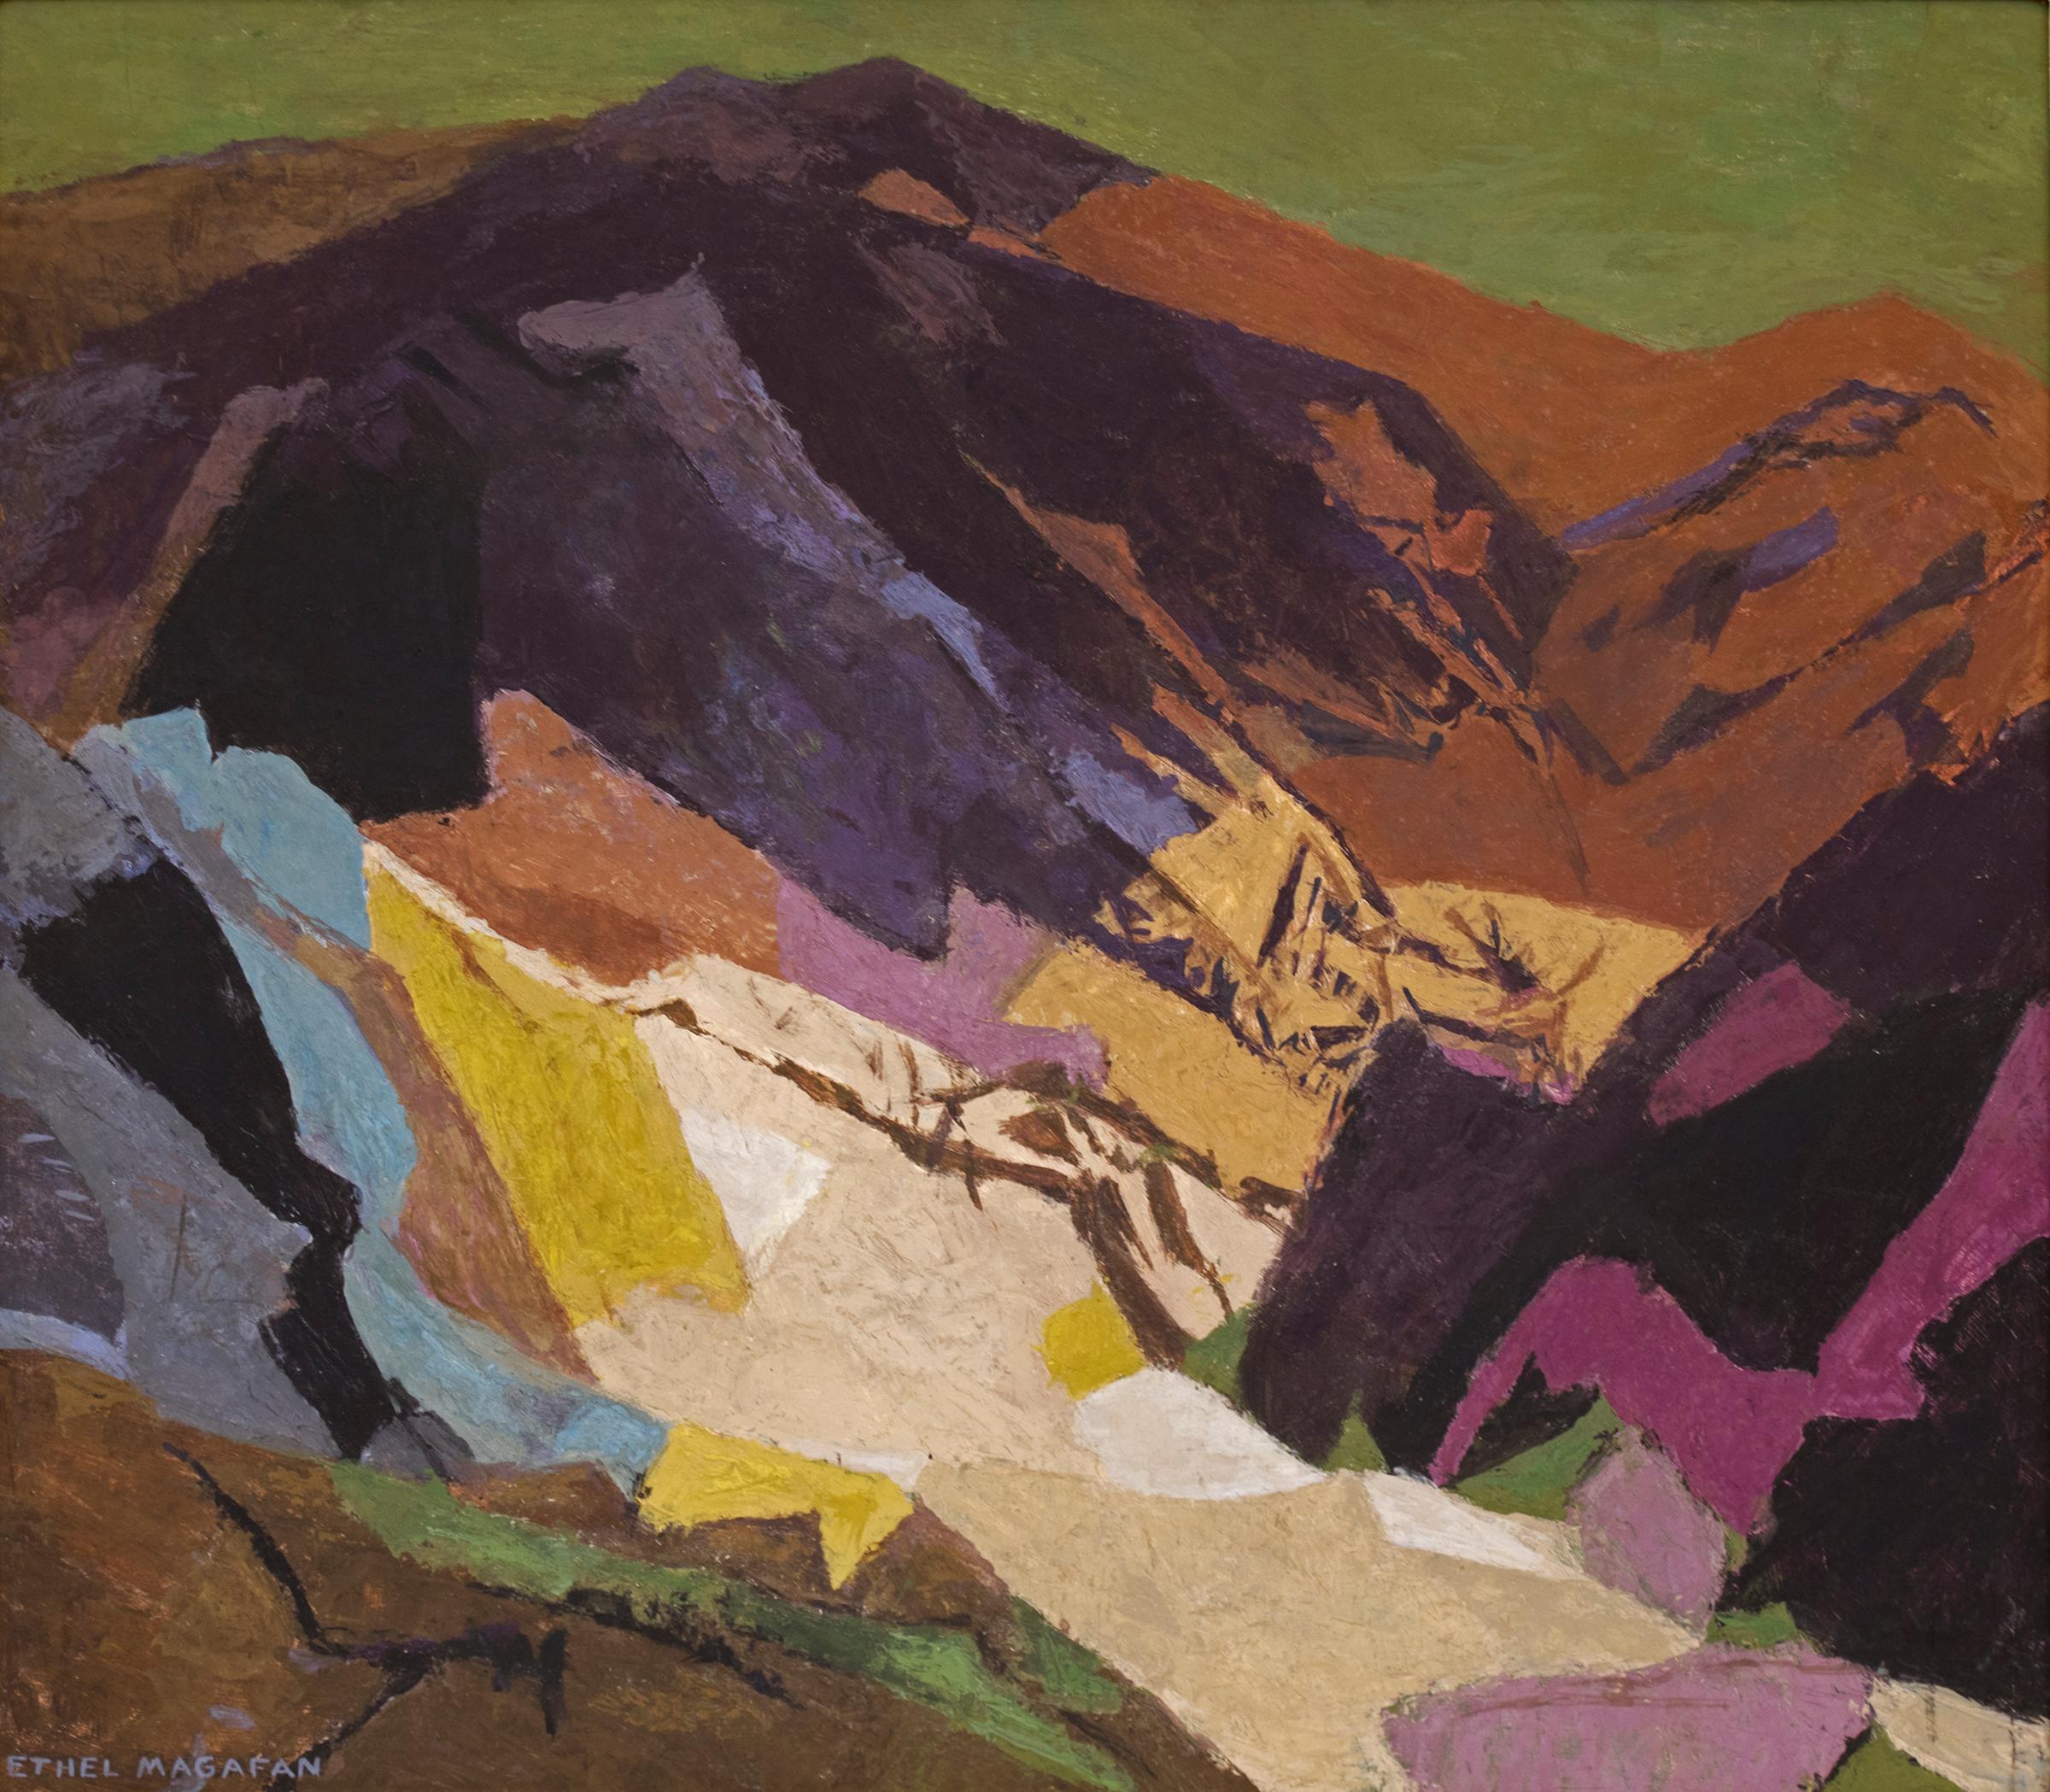 Ethel Magafan Abstract Painting - Distant Country (Semi-Abstract Mountain Landscape: Purple, Gold, Green, Brown)